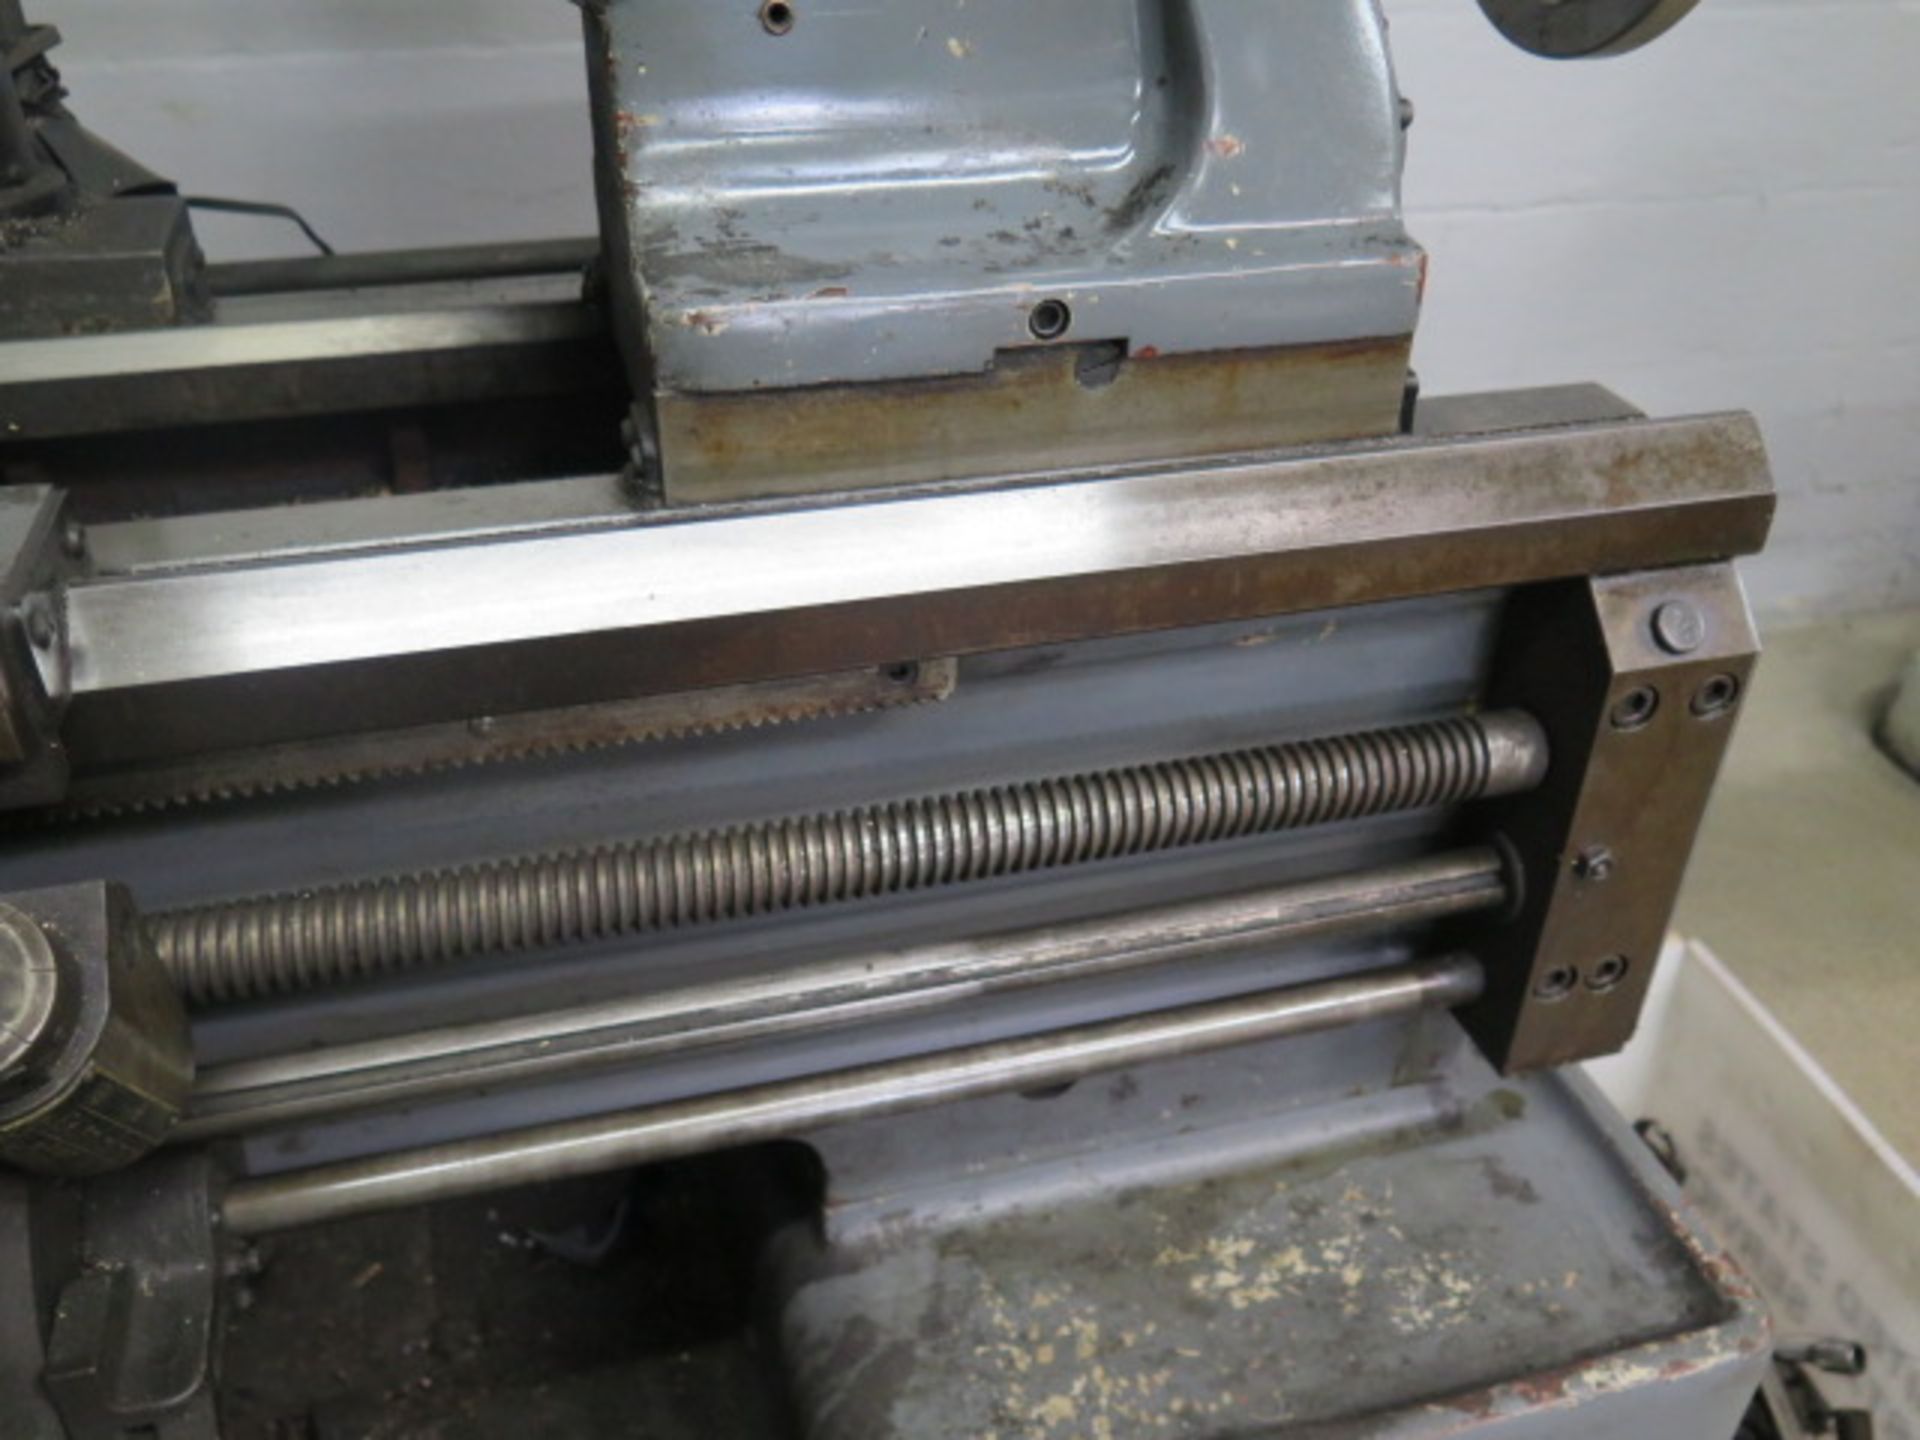 Royal 17” x 42” Geared Head Gap Bed Lathe s/n 79C928 w/ 32-1800 RPM, Taper Attachment, SOLD AS IS - Image 19 of 25